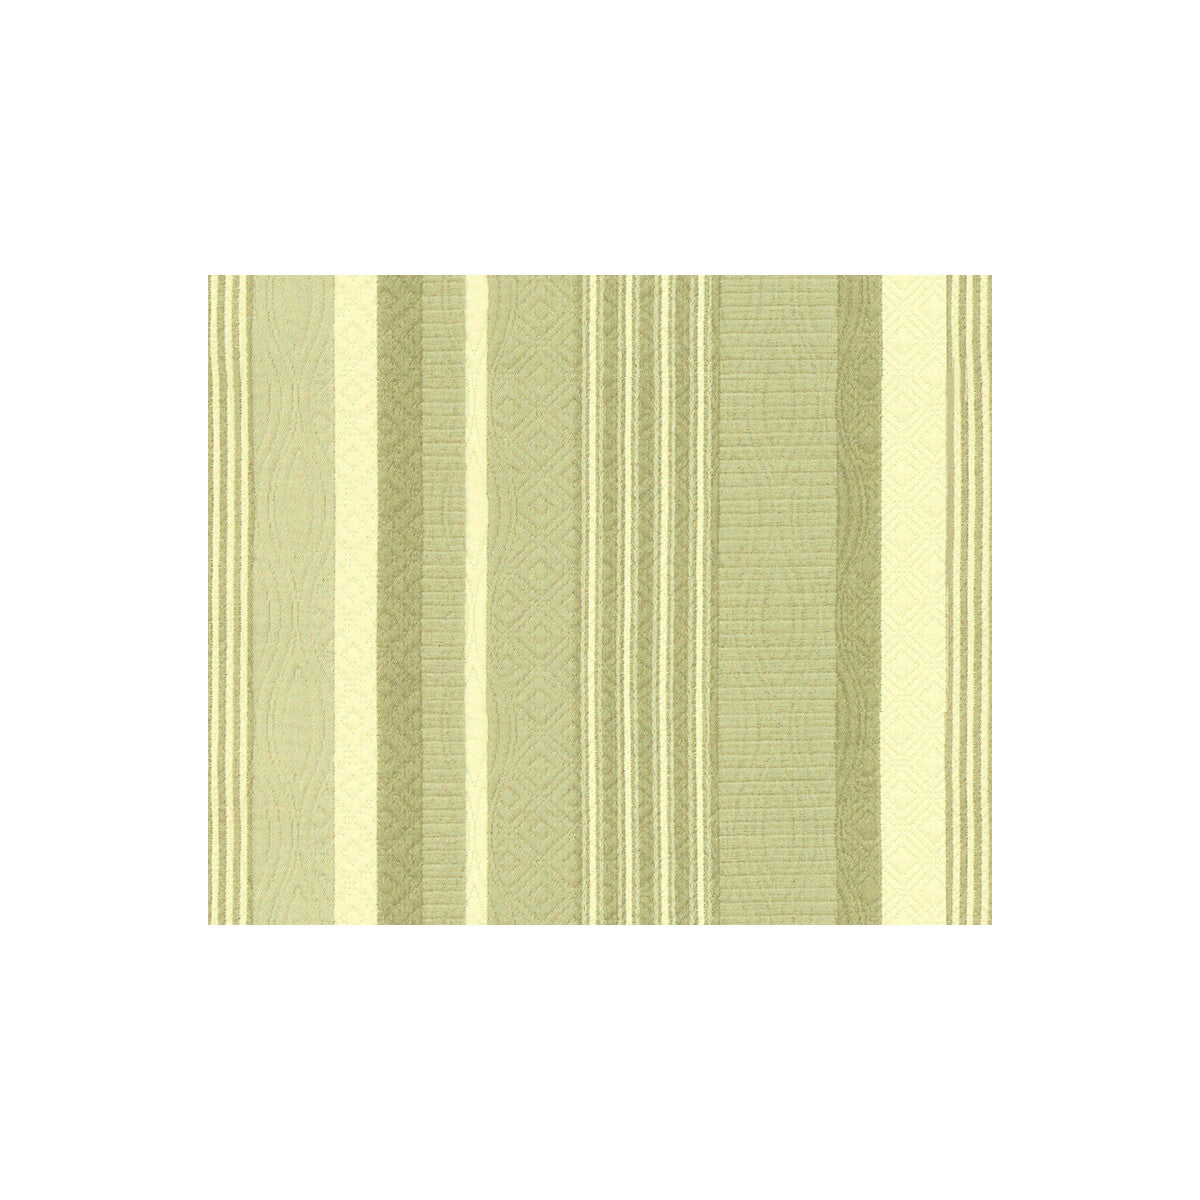 Just Curious fabric in mineral color - pattern 32112.15.0 - by Kravet Couture in the Modern Colors II collection